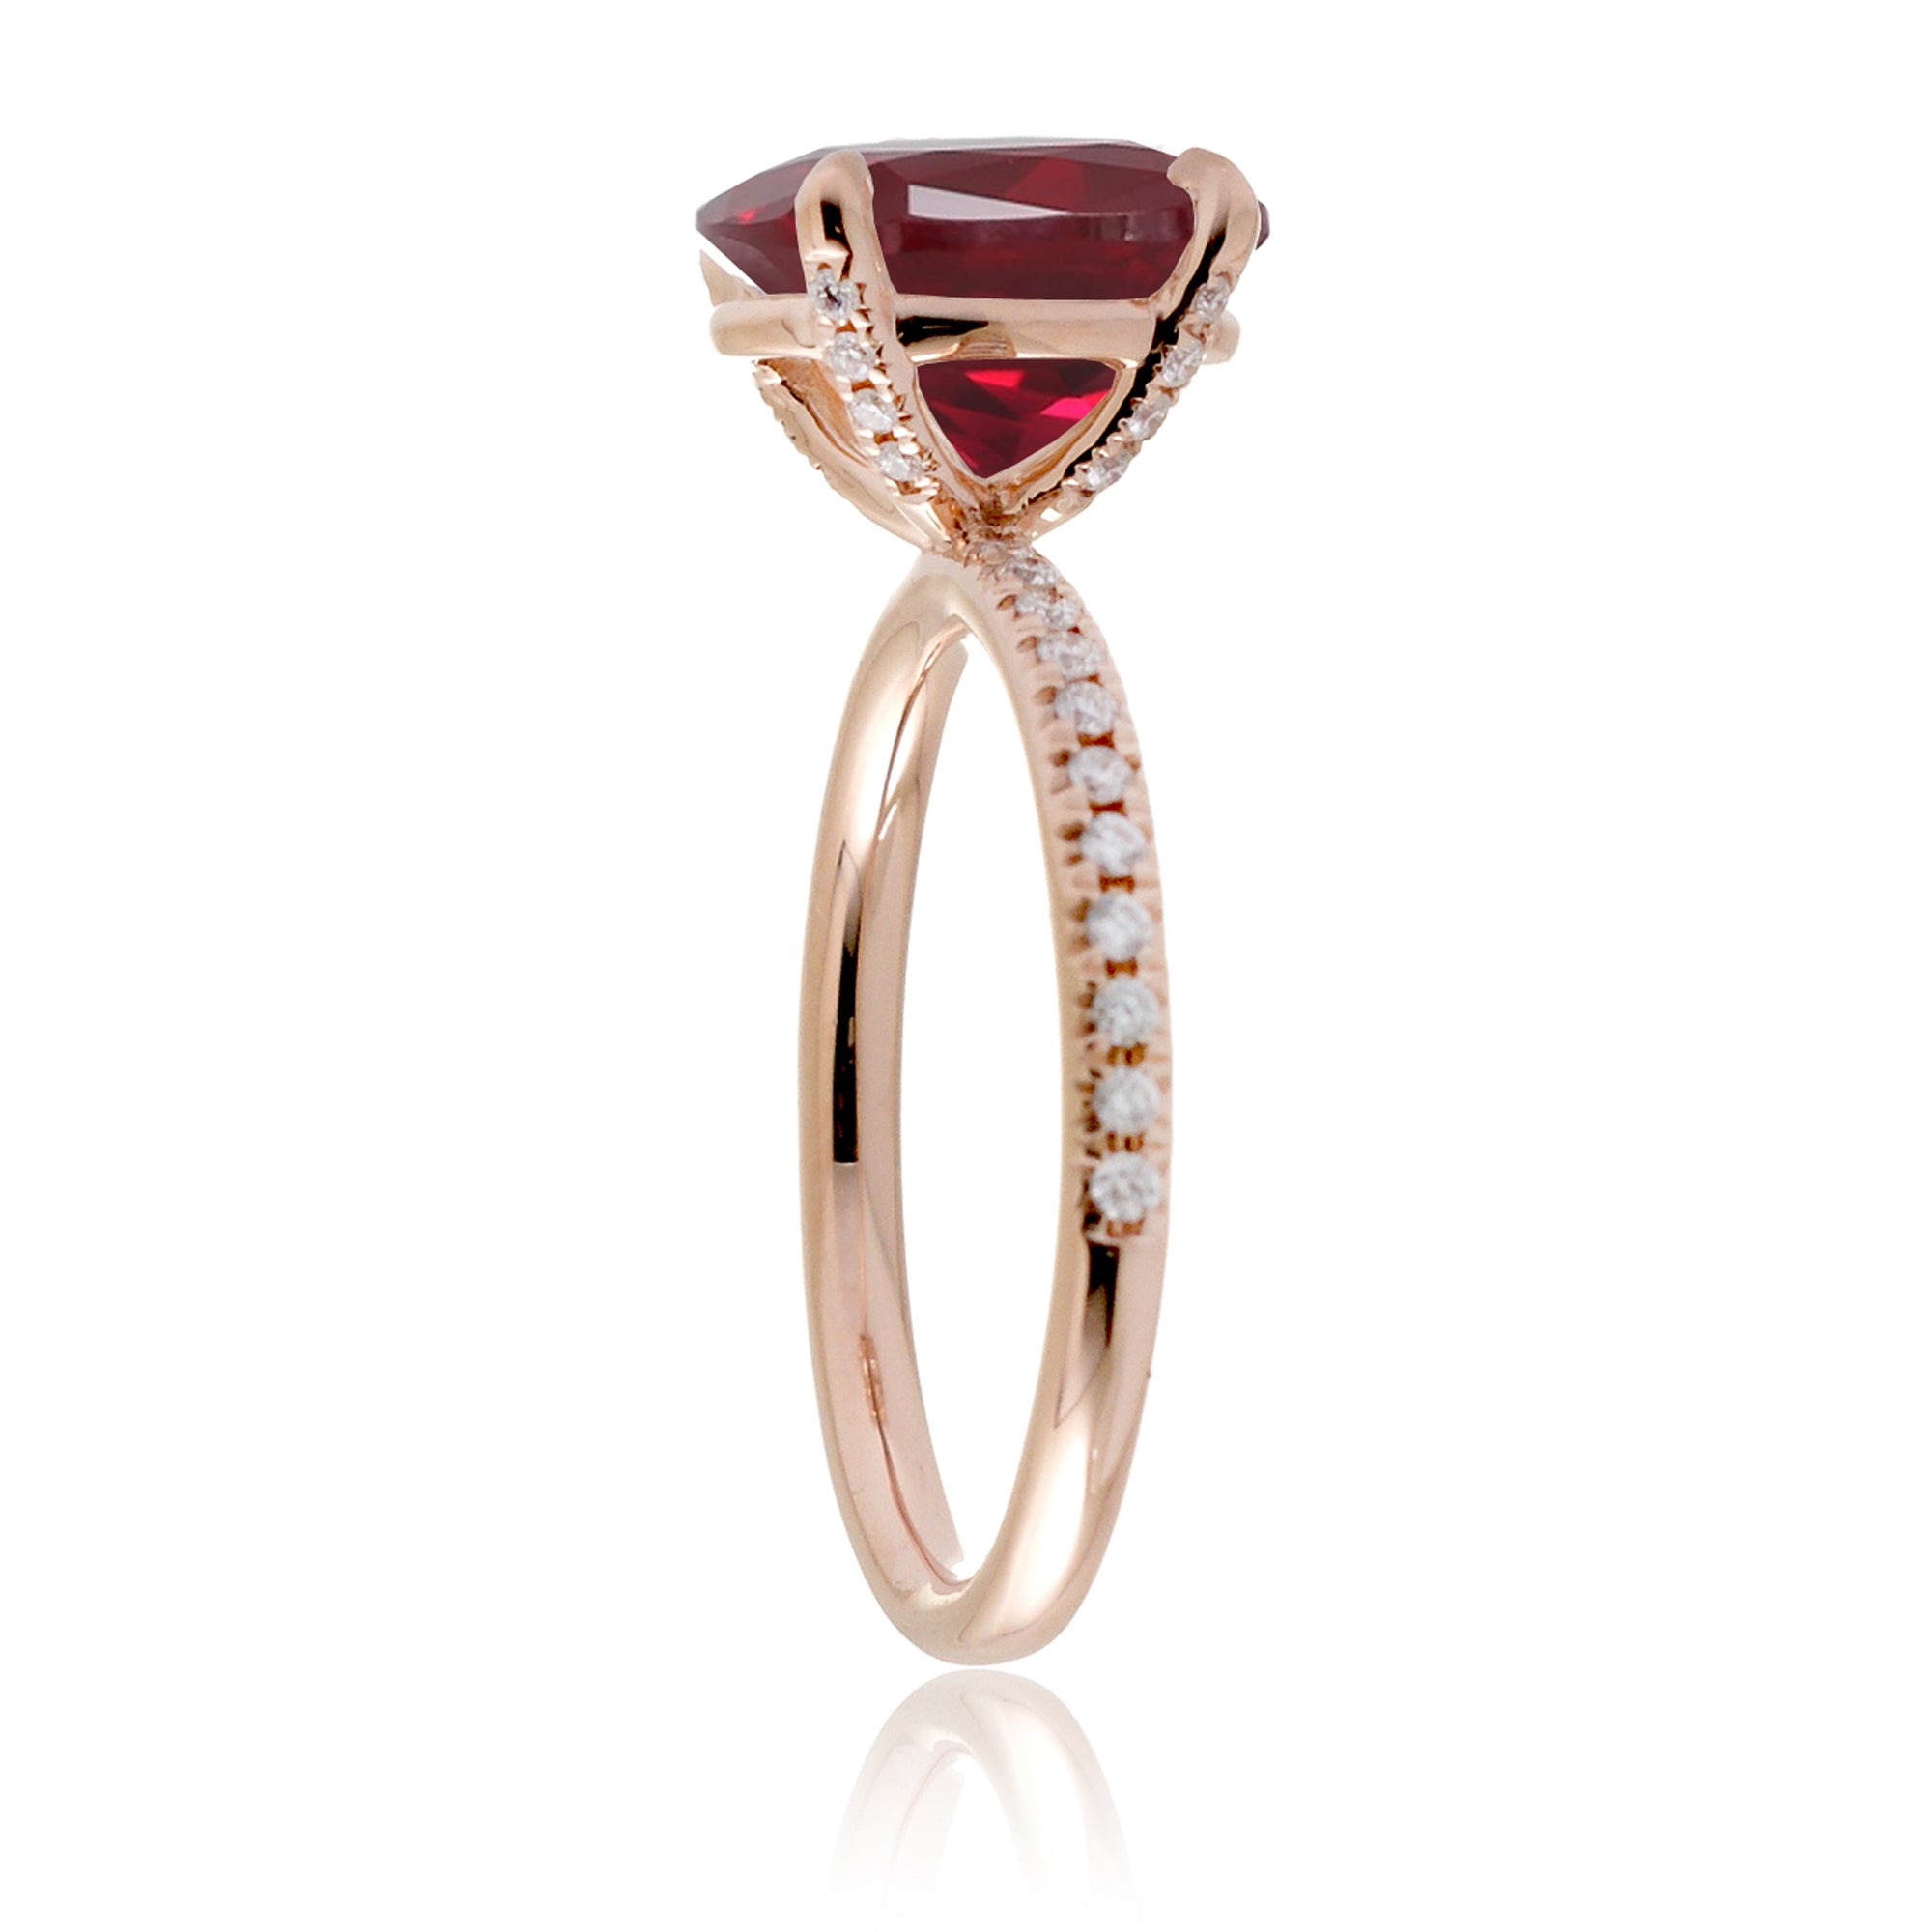 Oval lab-grown ruby diamond band engagement ring rose gold - the Ava